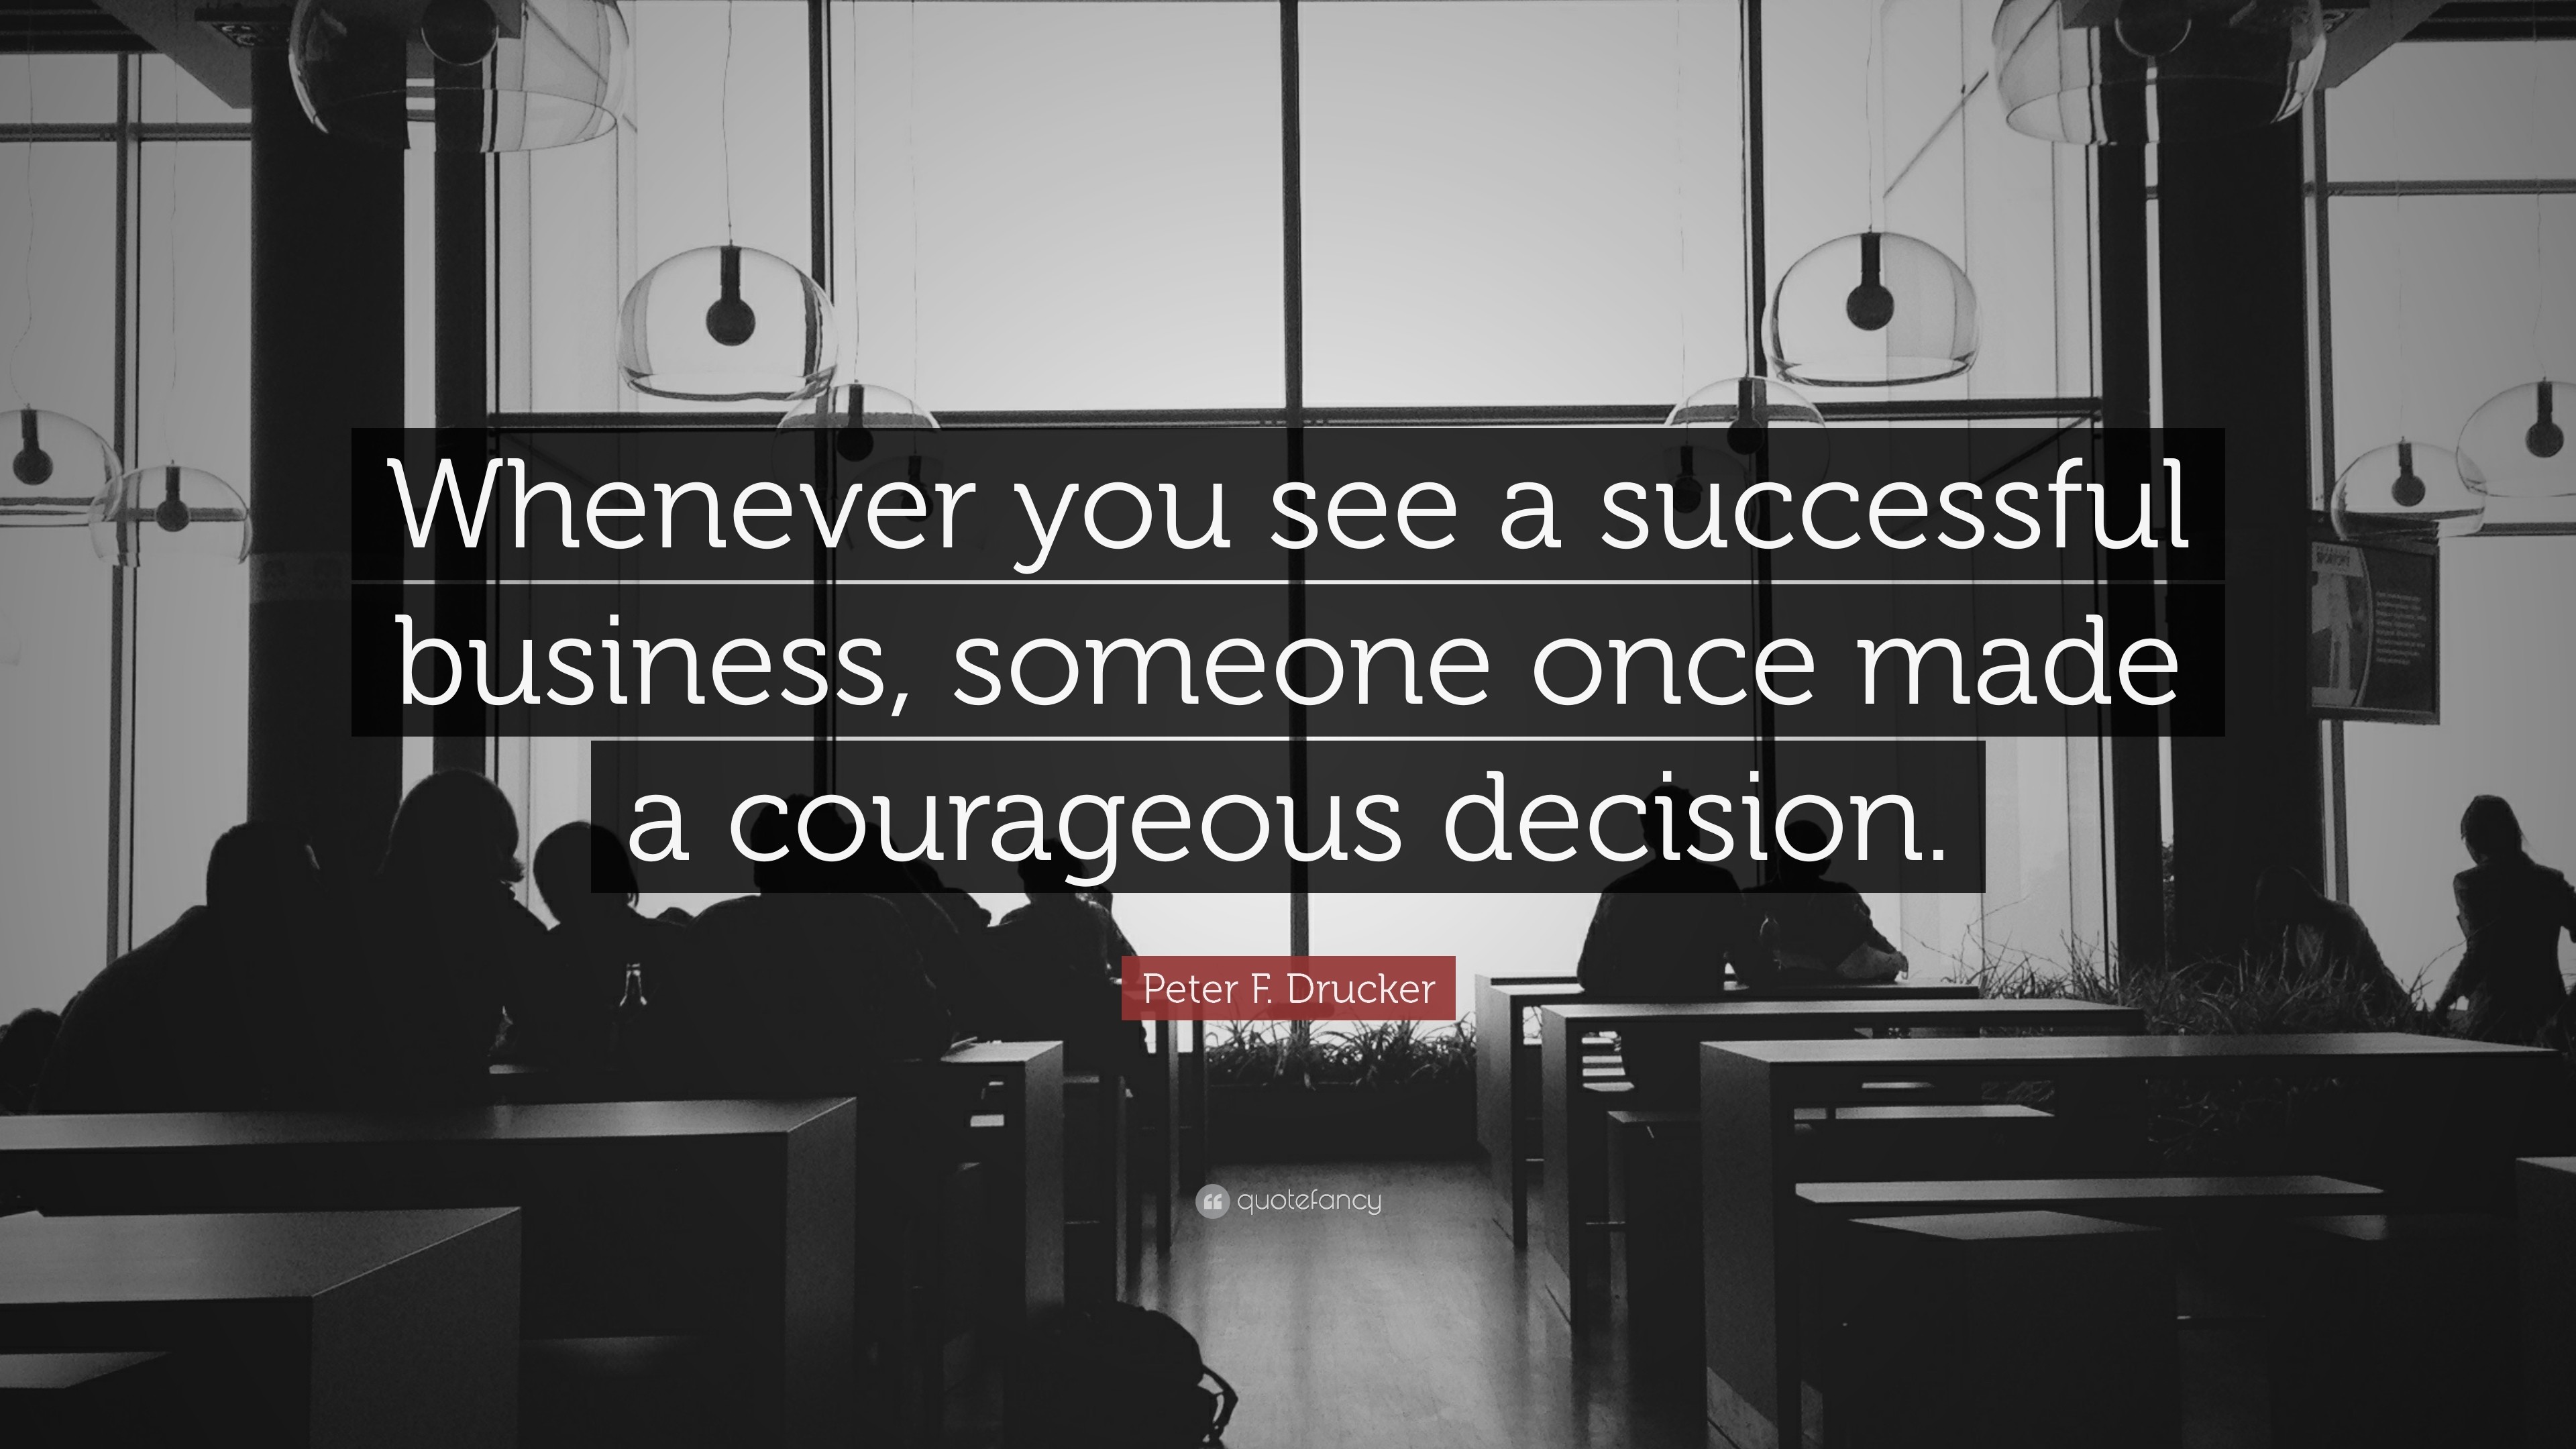 3840x2160 Success Quotes: “Whenever you see a successful business, someone once made  a courageous